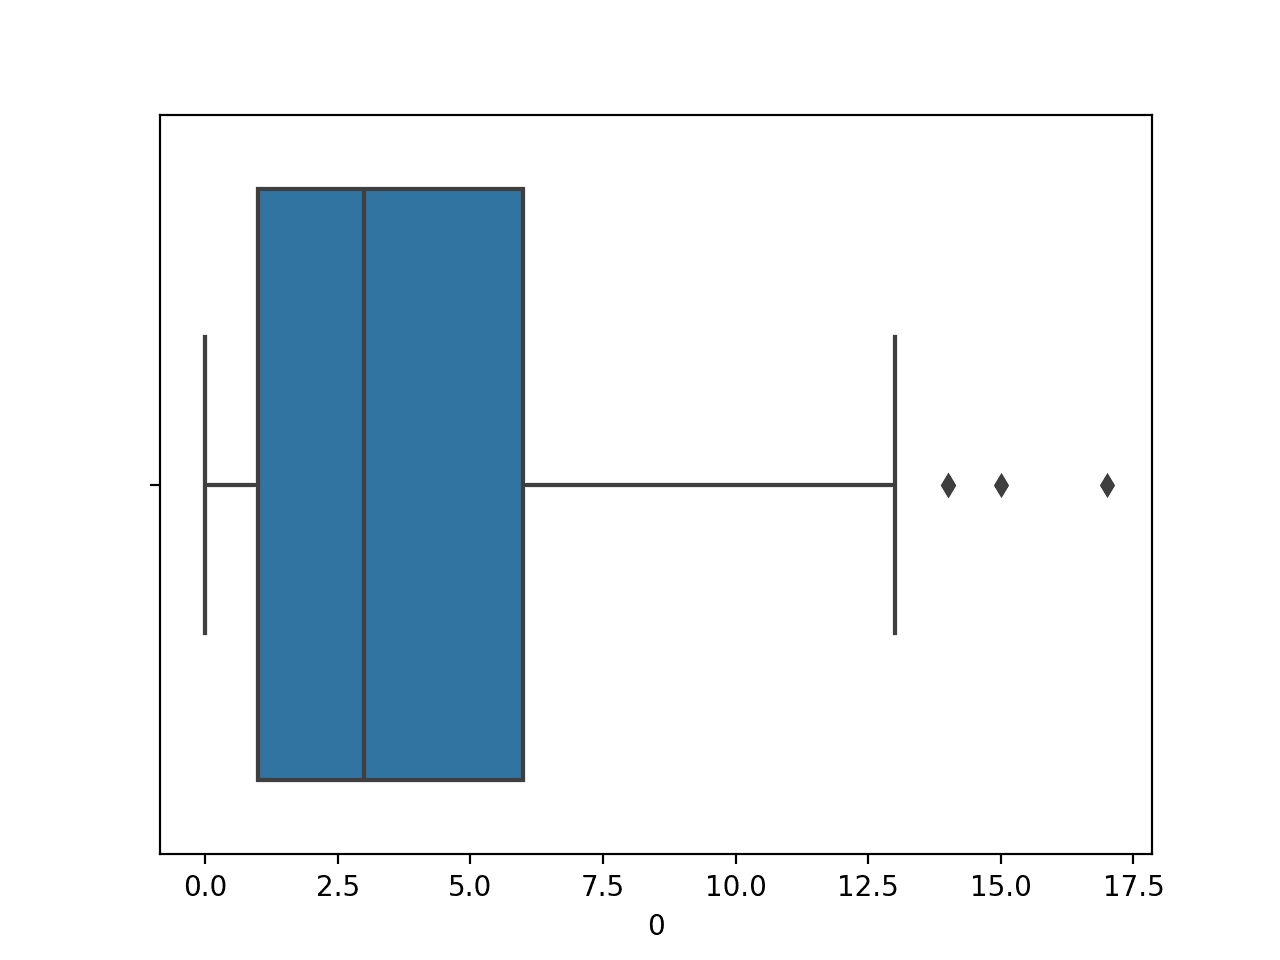 Box and Whisker Plot of Number of Times Pregnant Numerical Variable